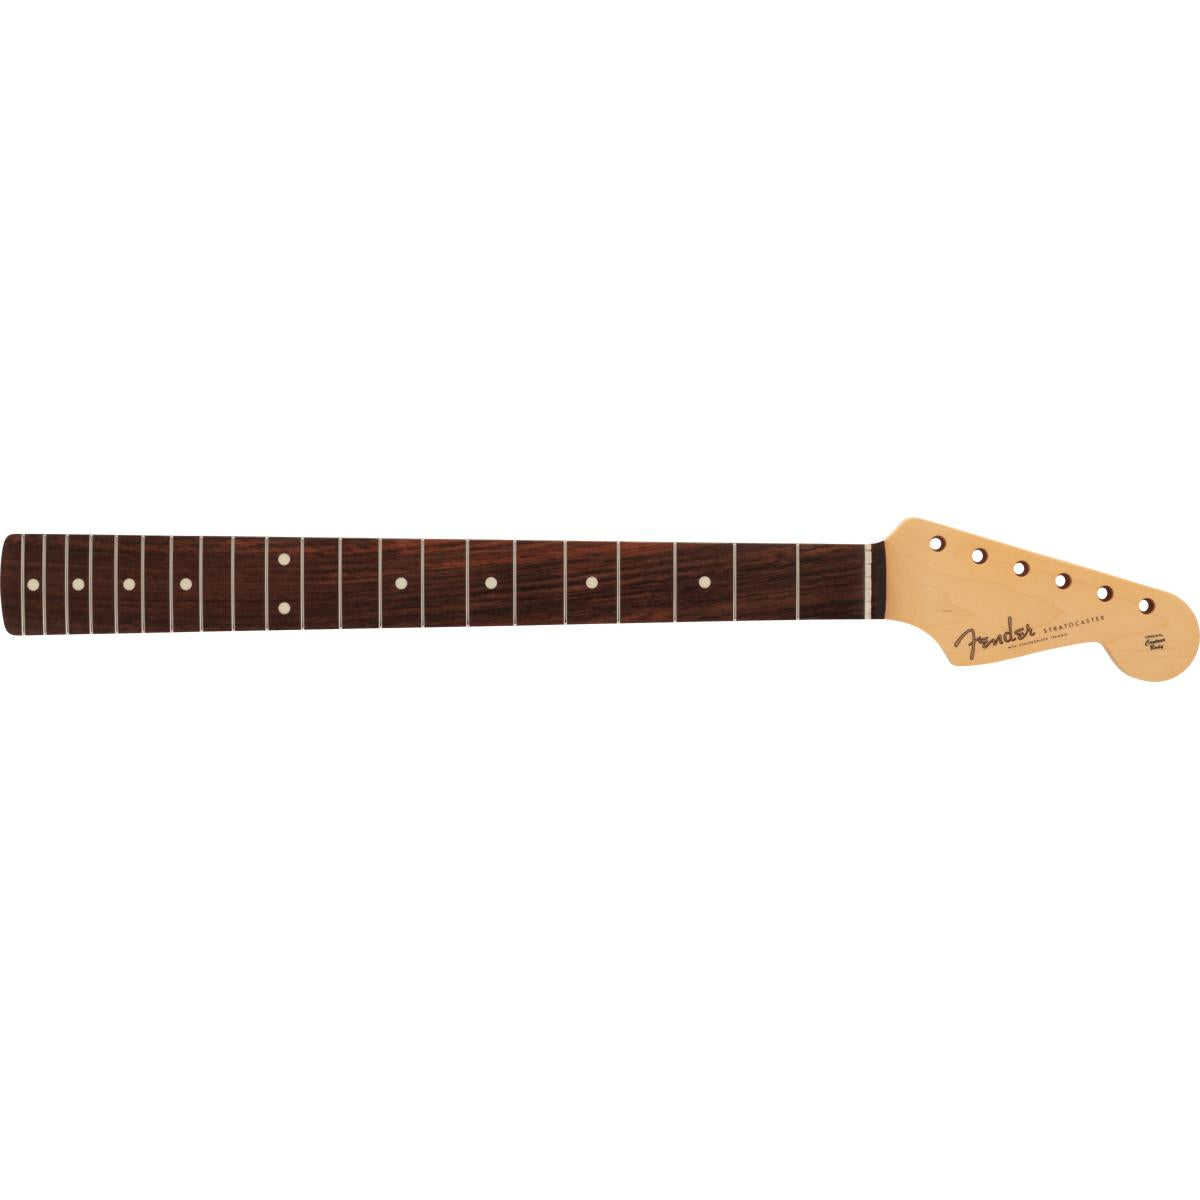 Fender Made in Japan Traditional II 60s Stratocaster Neck 21 Vintage Frets 9.5inch Radius U Shape Rosewood - 0990500921